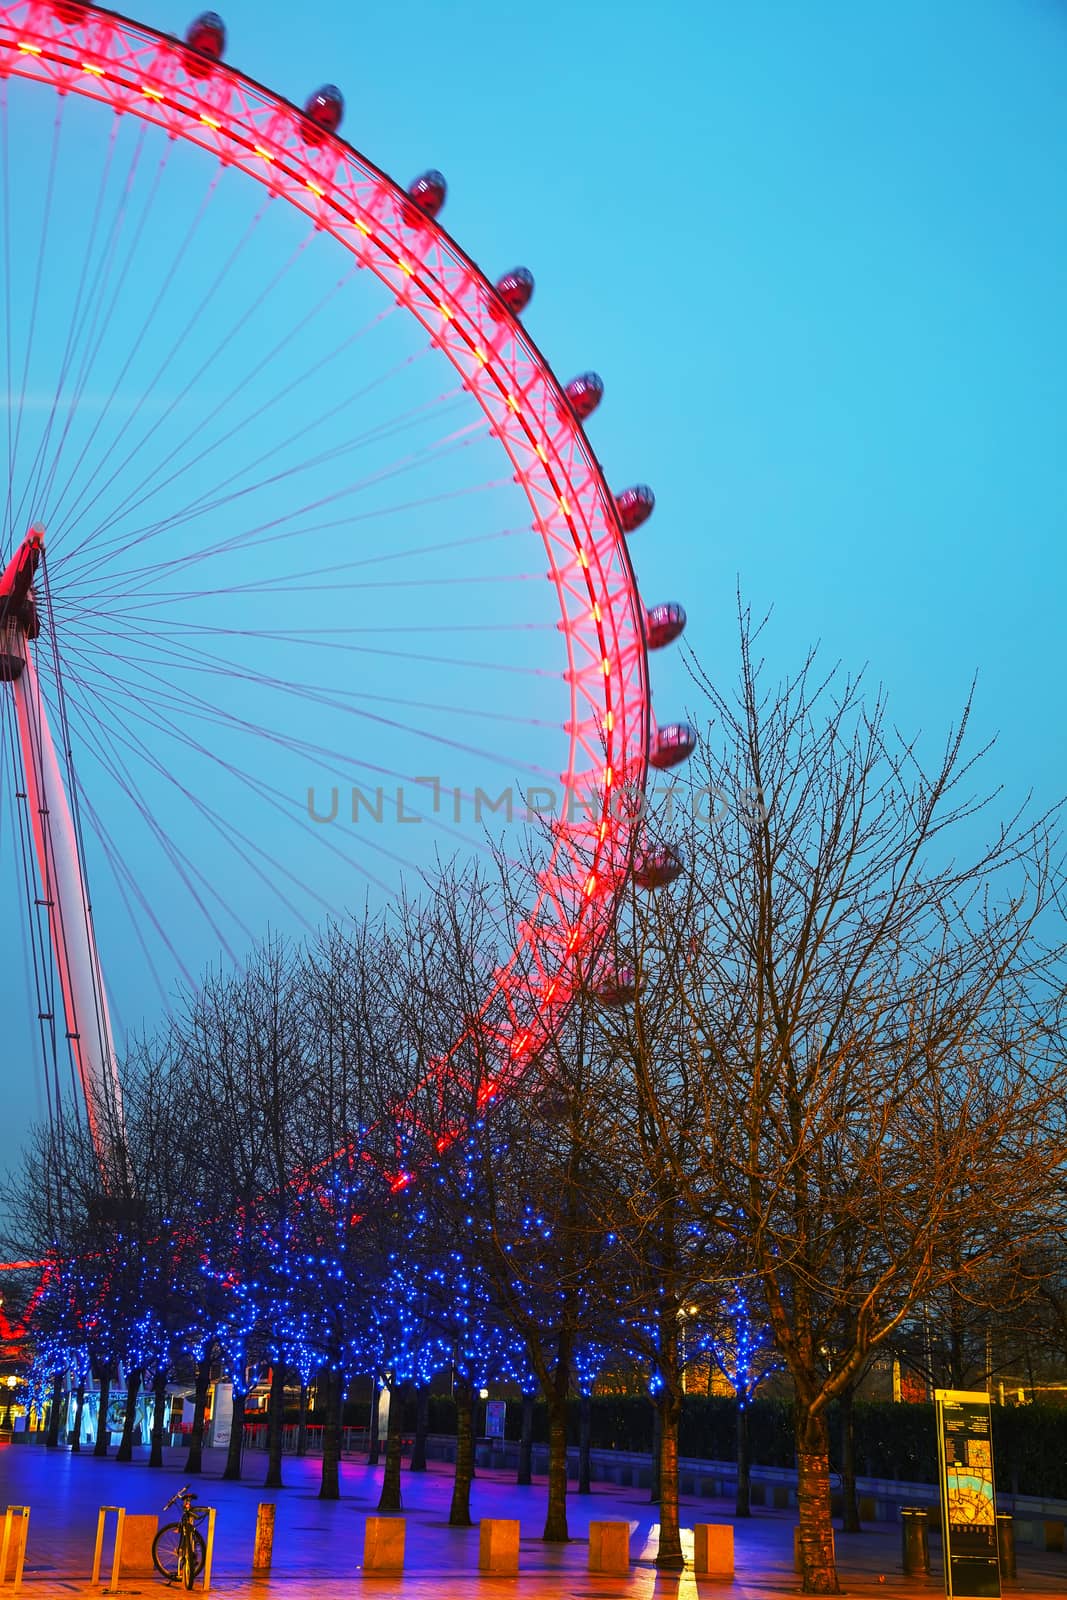 LONDON - APRIL5: The London Eye Ferris wheel in the evening on April 5, 2015 in London, UK. The entire structure is 135 metres tall and the wheel has a diameter of 120 metres.